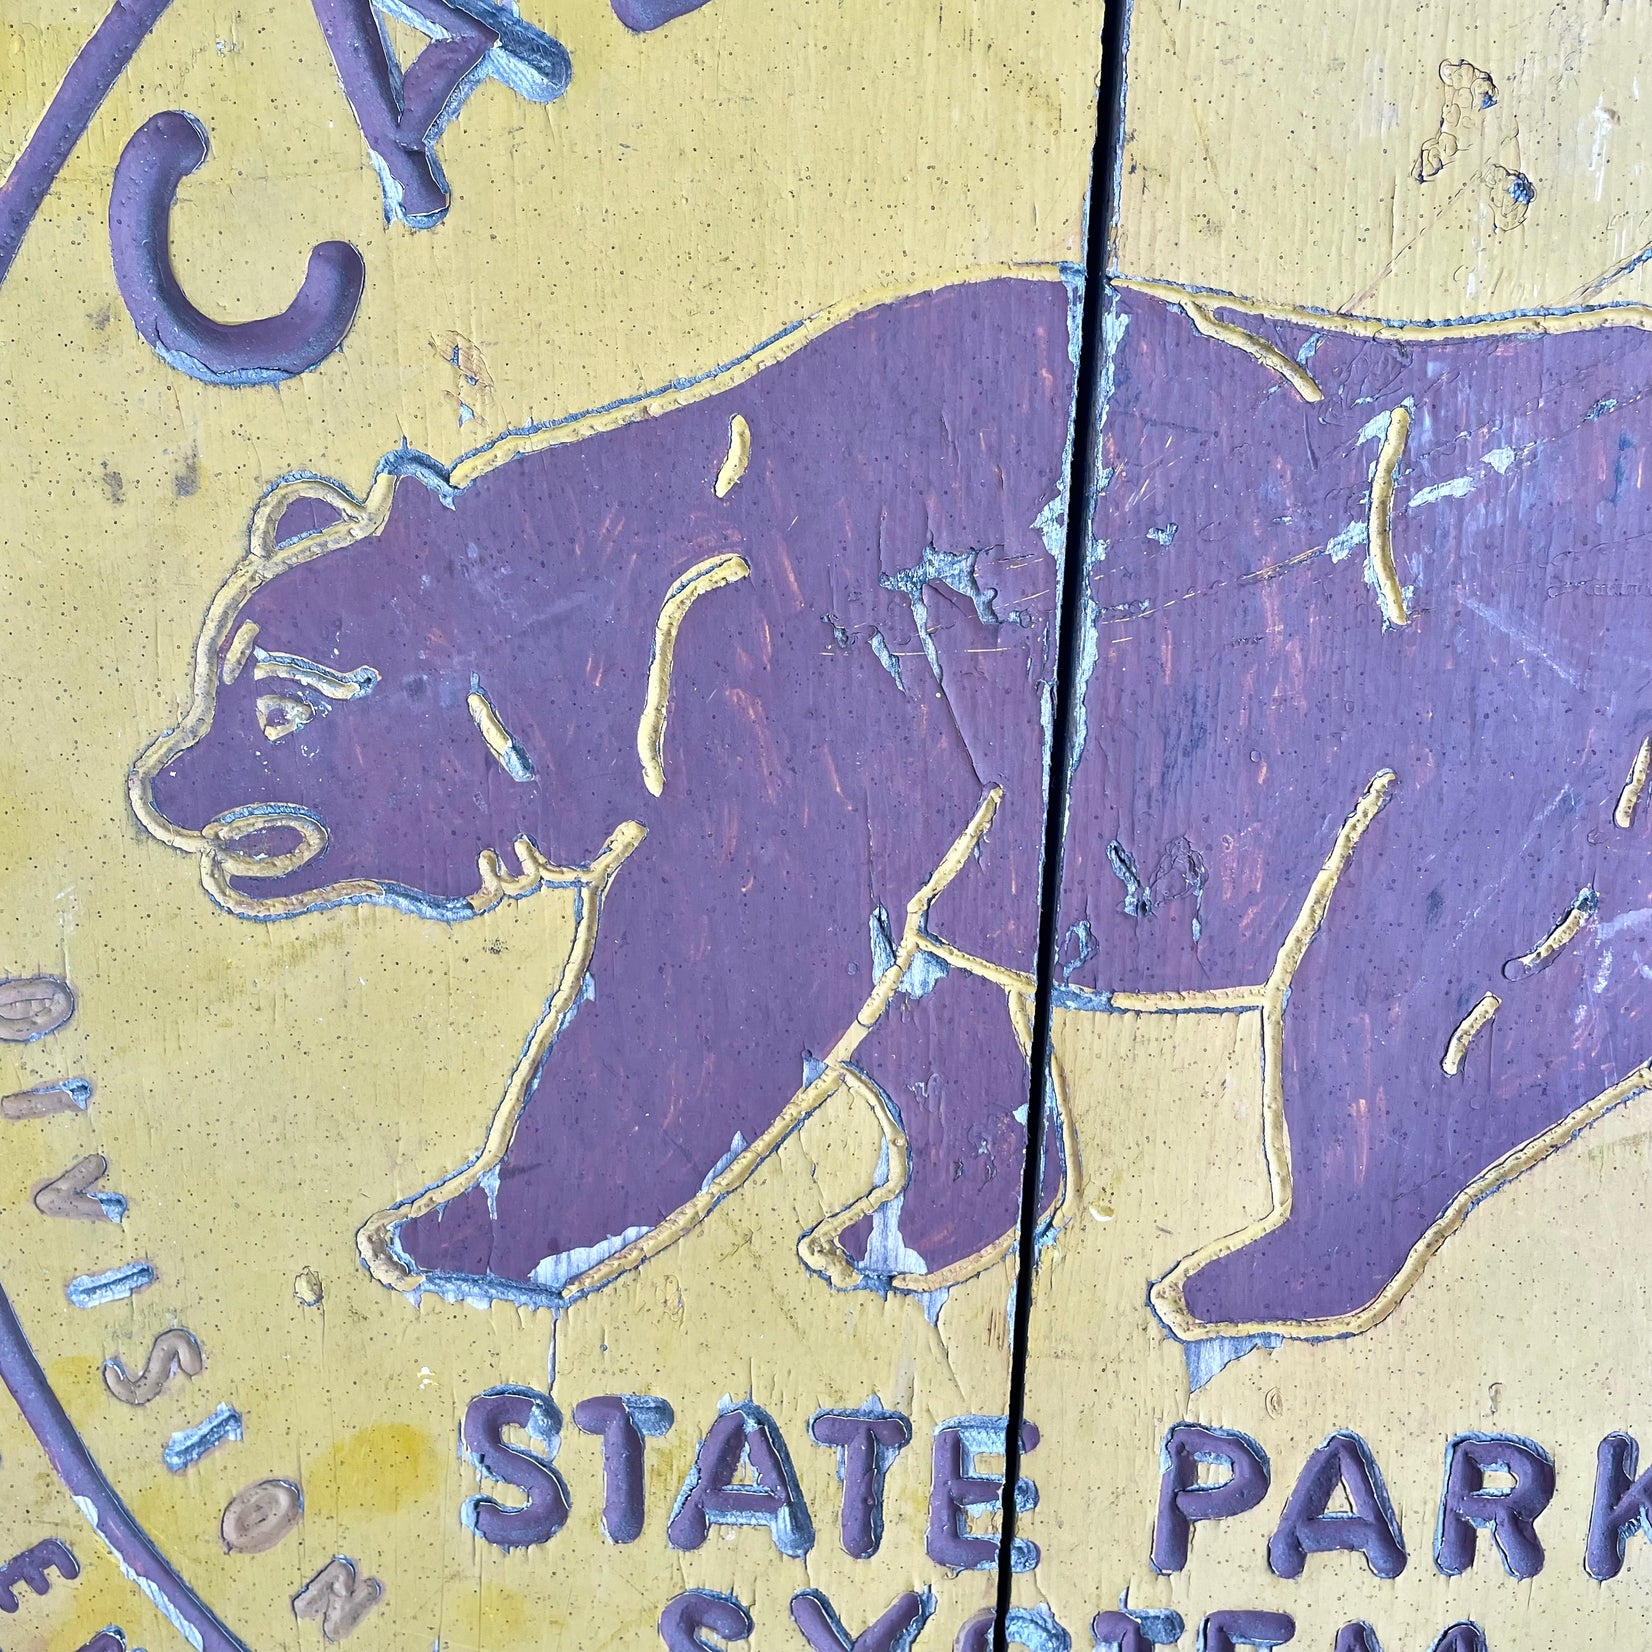 Handmade California State Park System Wooden Sign, circa 1970's